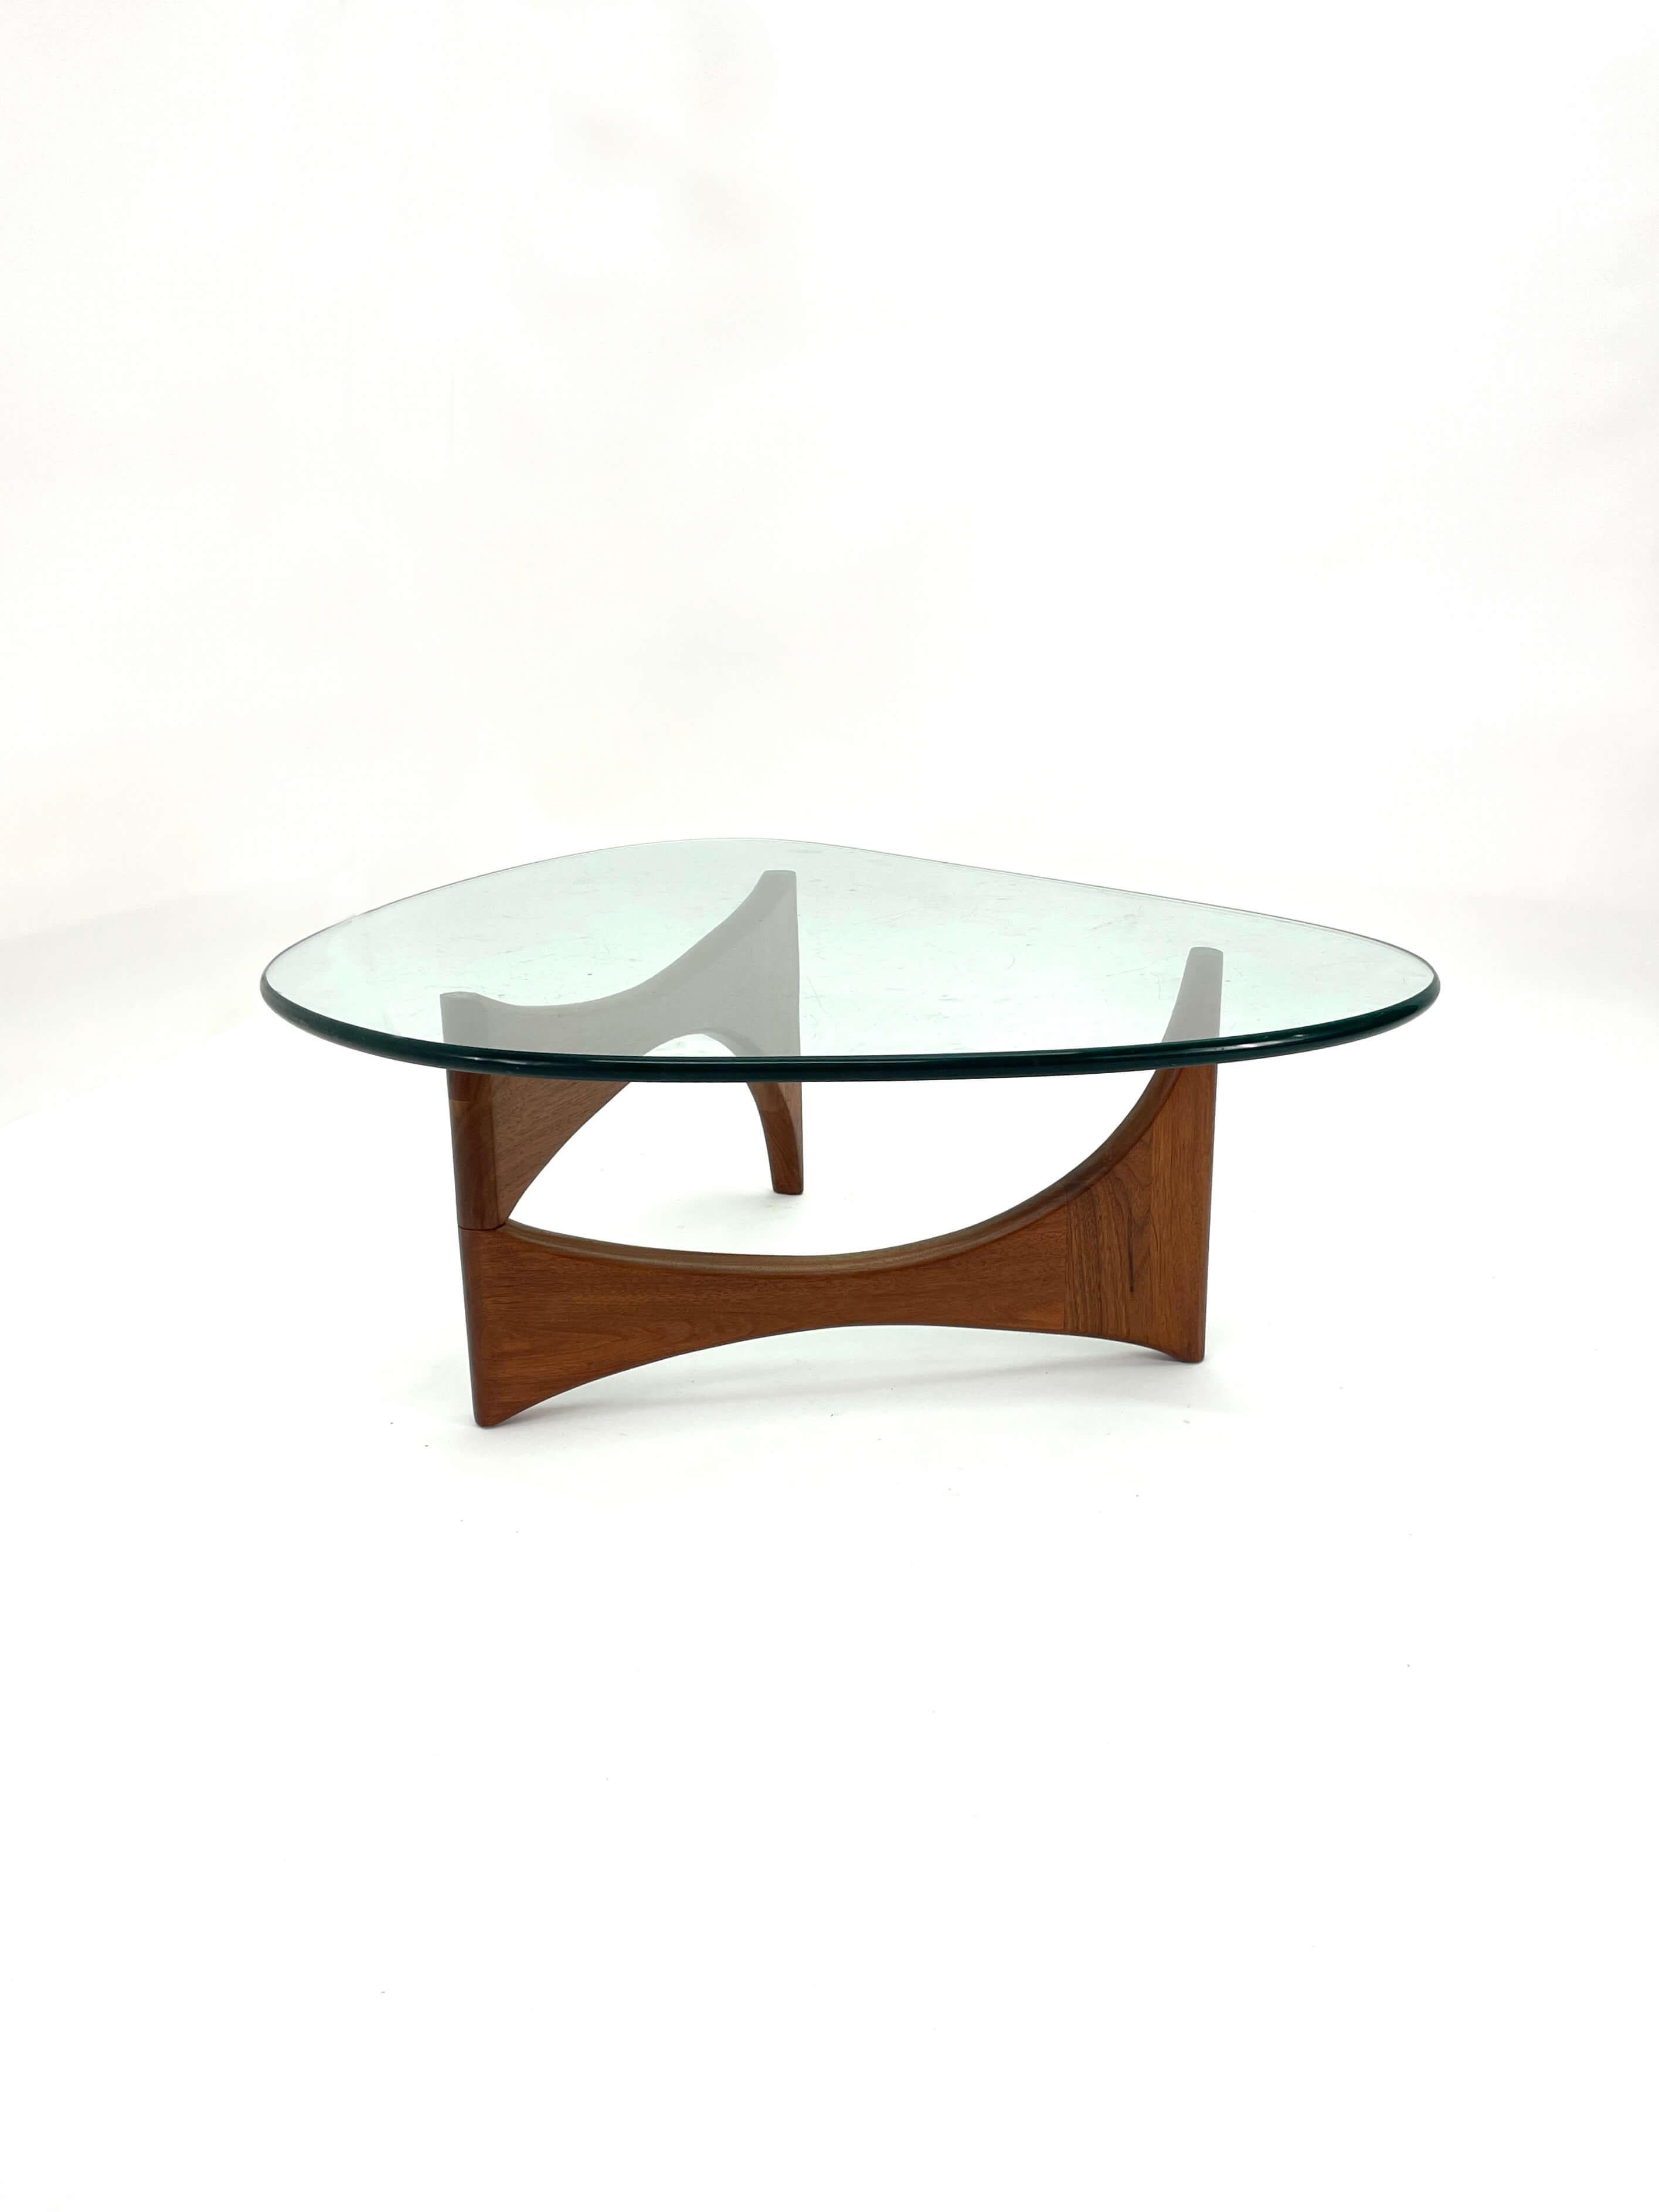 A vintage walnut coffee table designed by Adrian Pearsall. Very must in the style of Noguchi but this is an original design by Adrian Pearsall. 

Features a beautiful geometric tripod walnut base and a triangular glass top. Base is in excellent